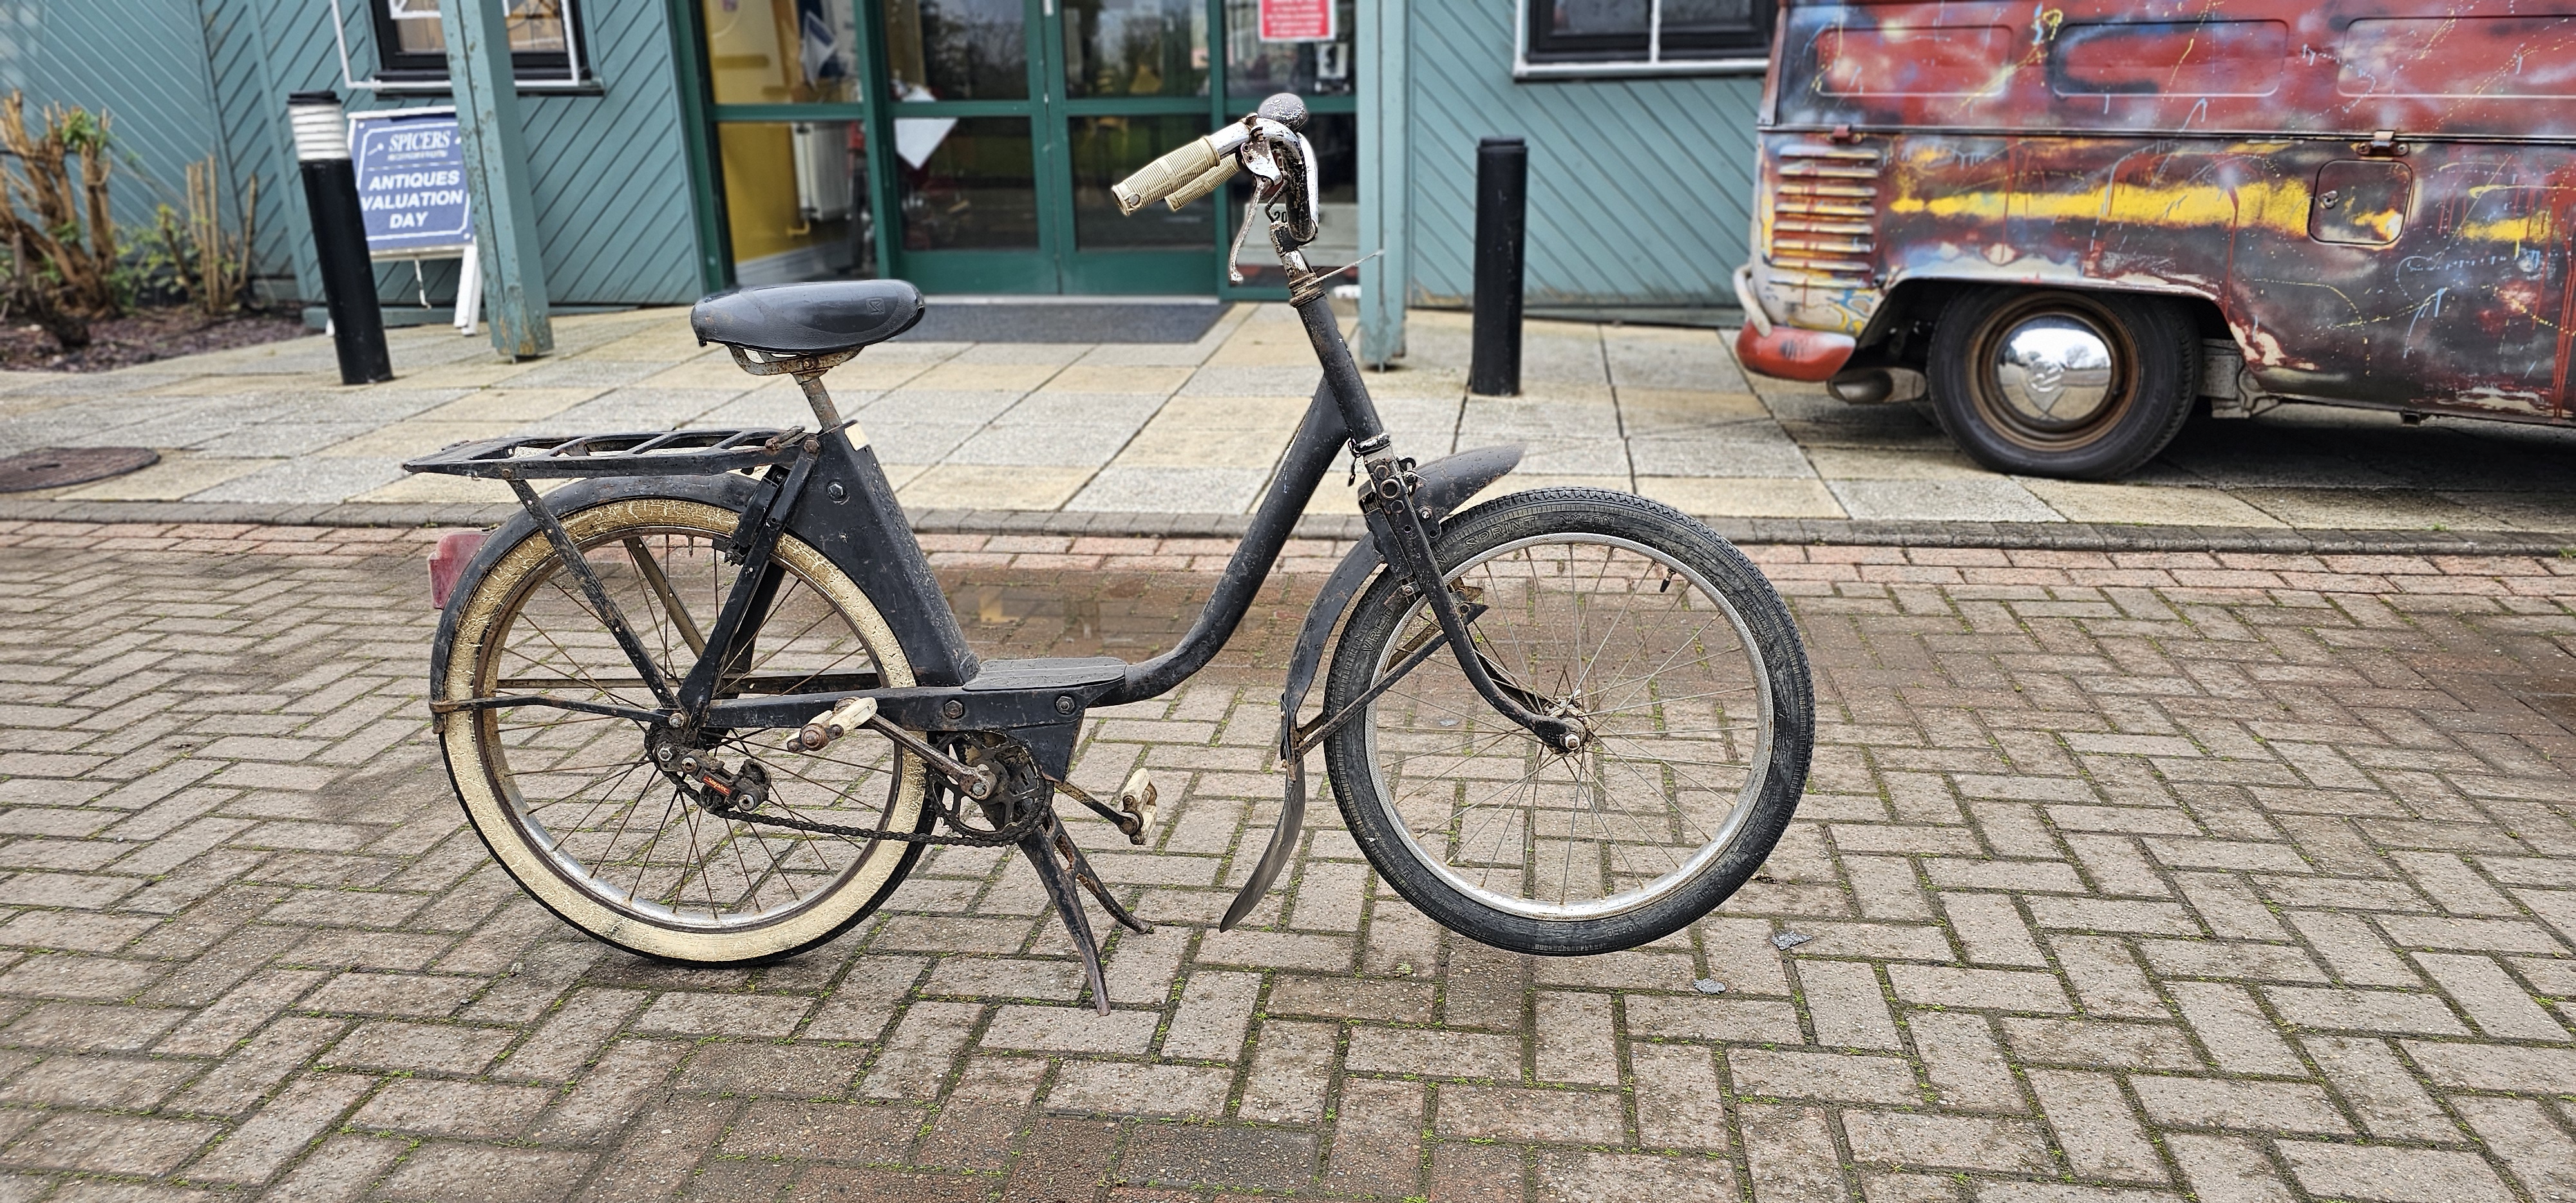 A VeloSolex 2200 rolling chassis, no engine or paperwork